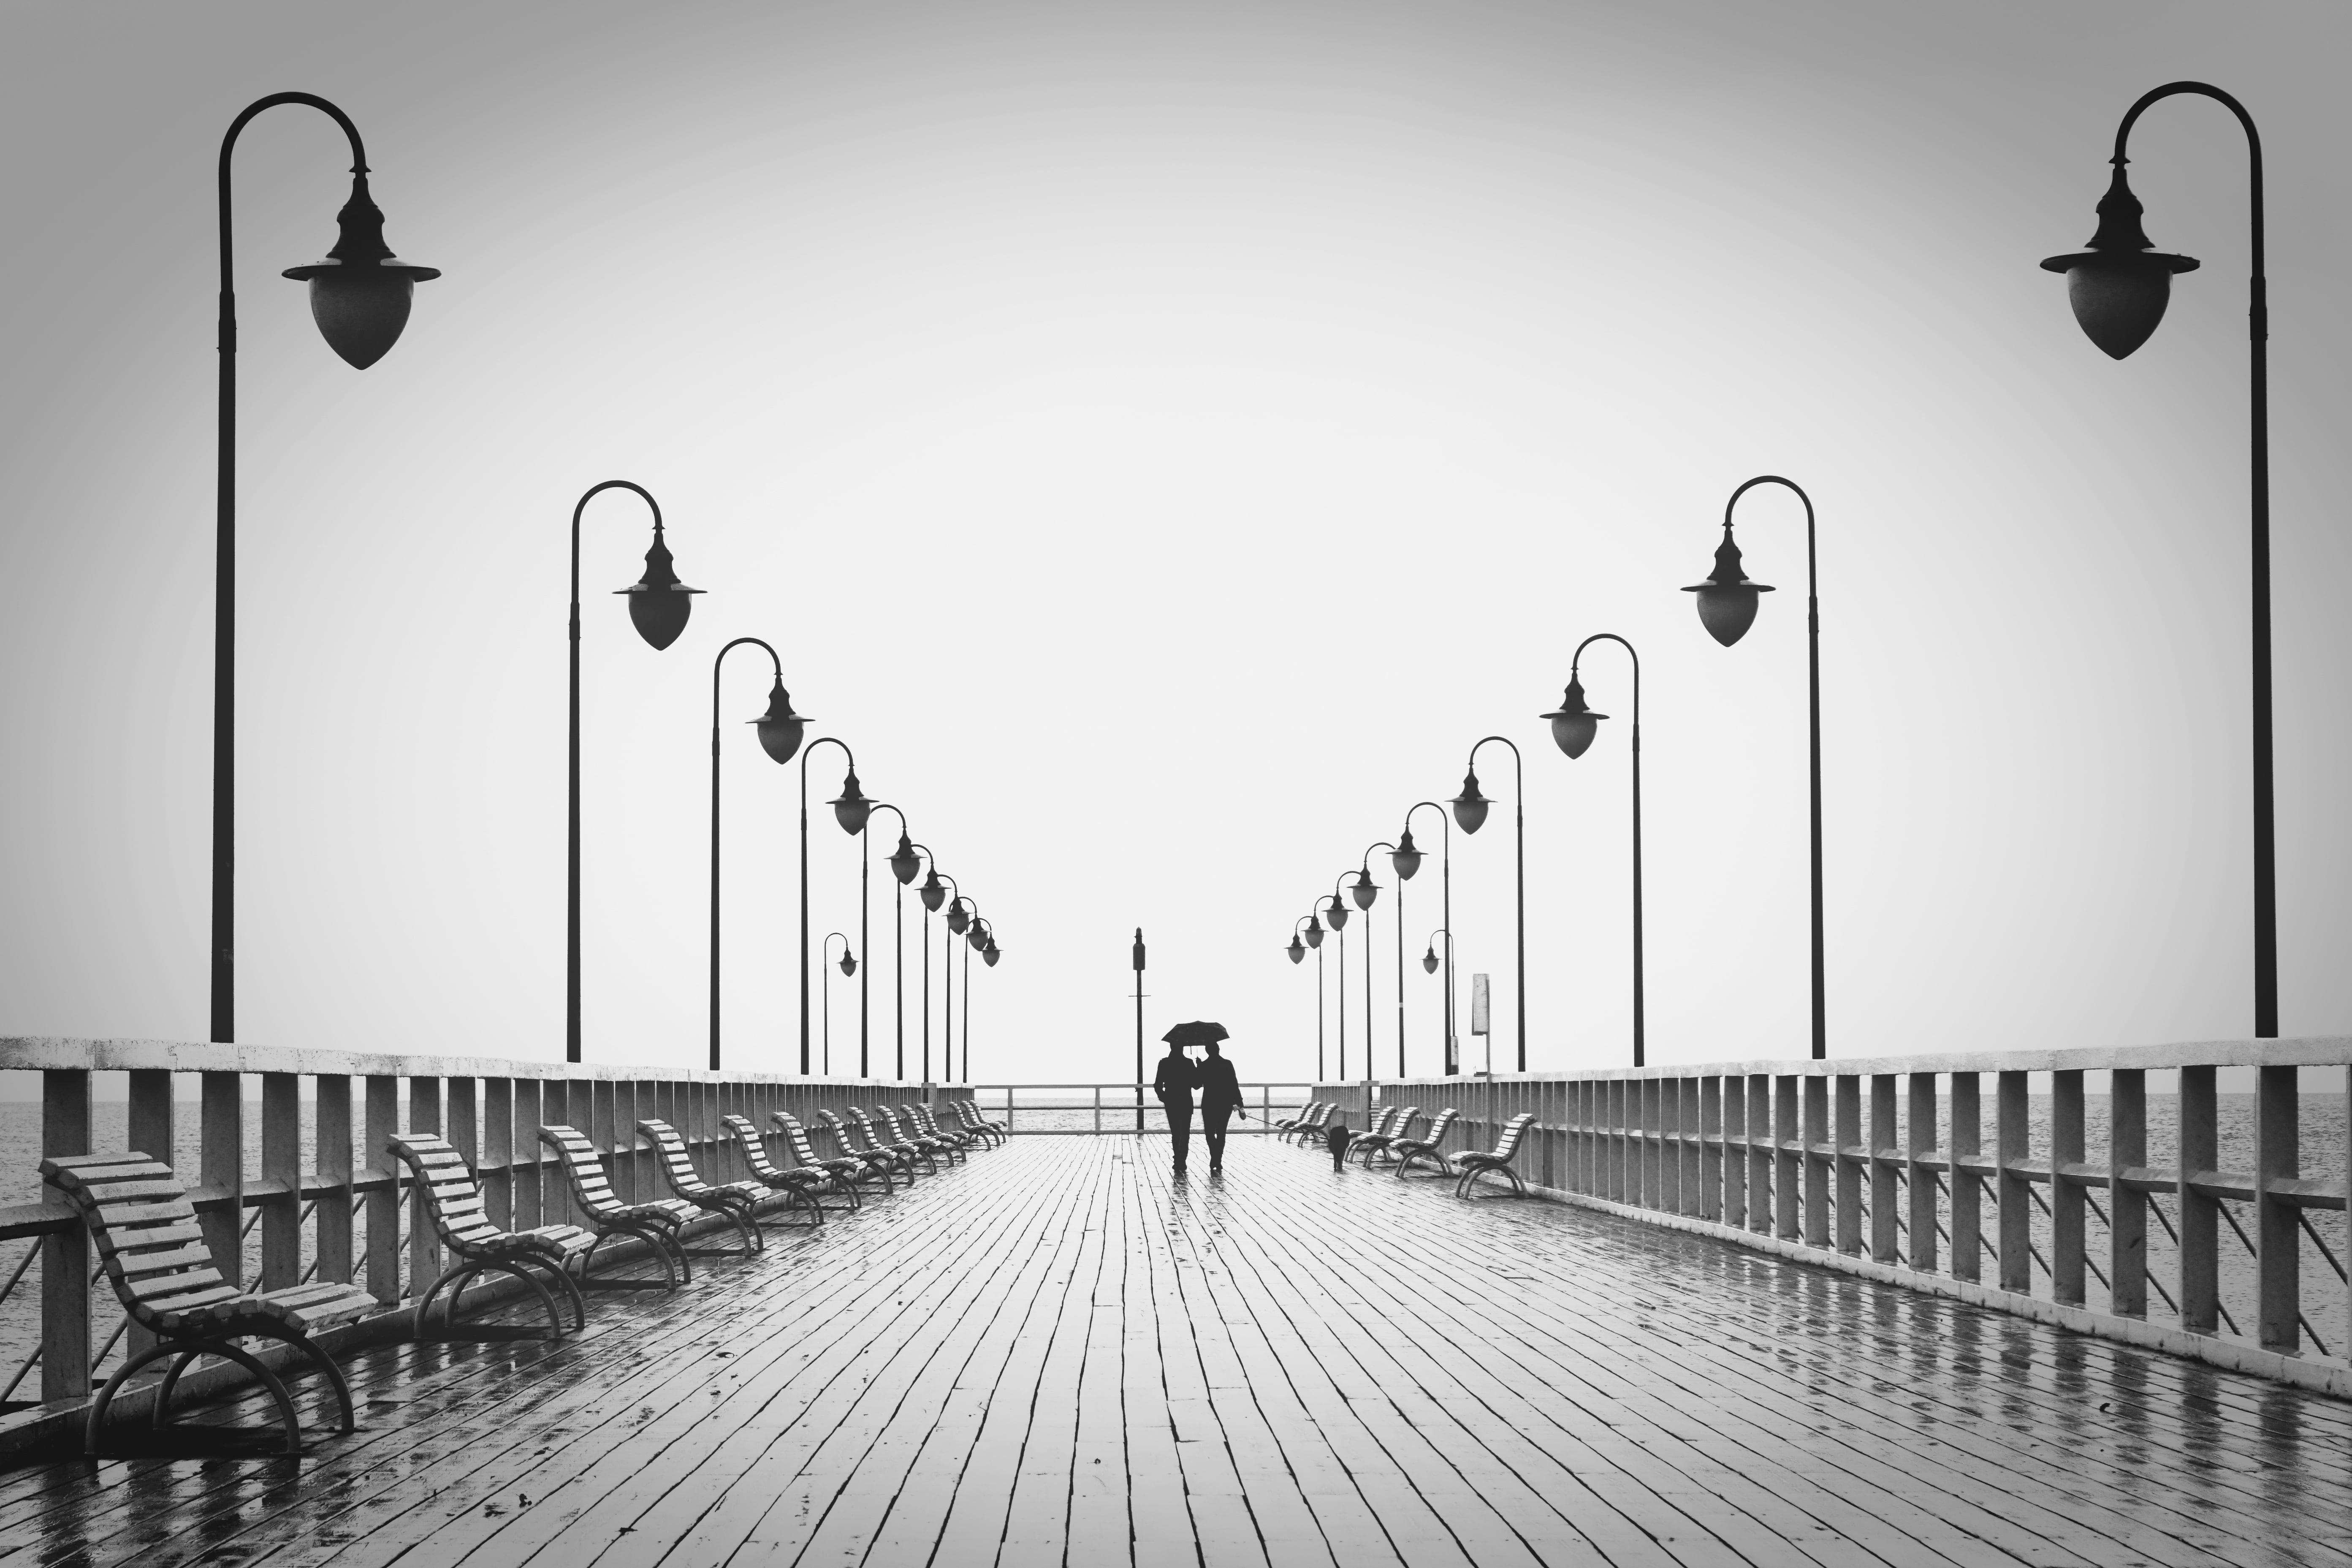 gray scale photo of two person holding umbrella